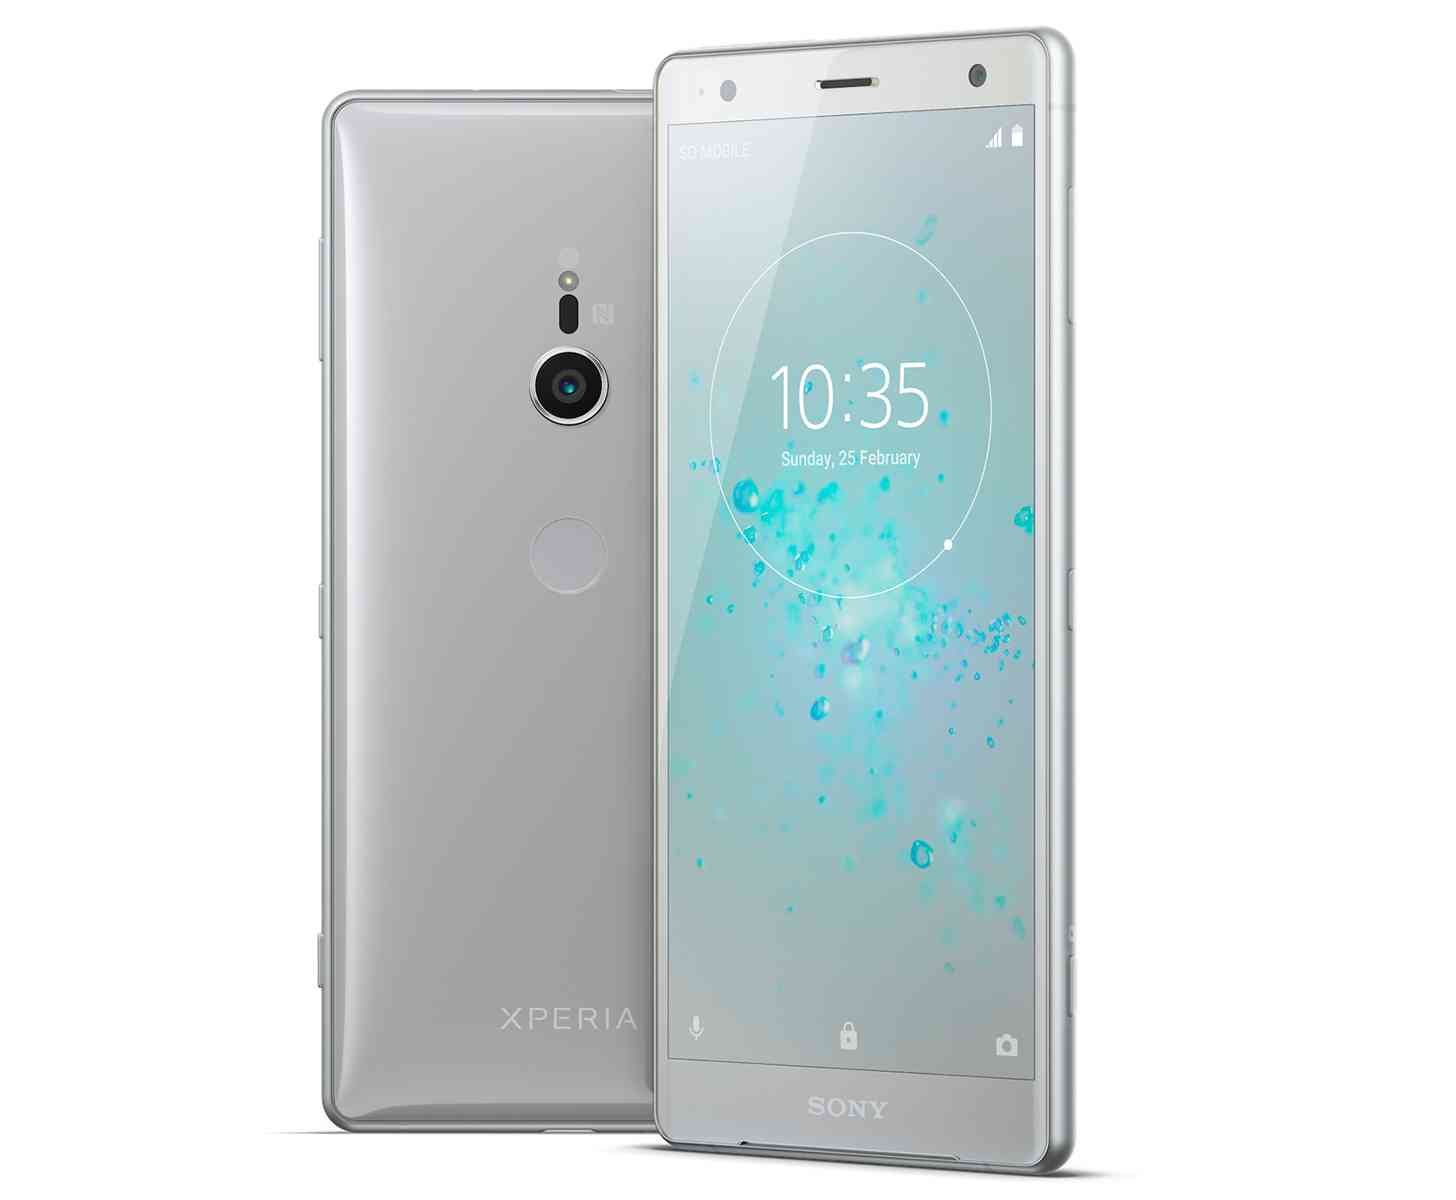 Sony Xperia XZ2 official